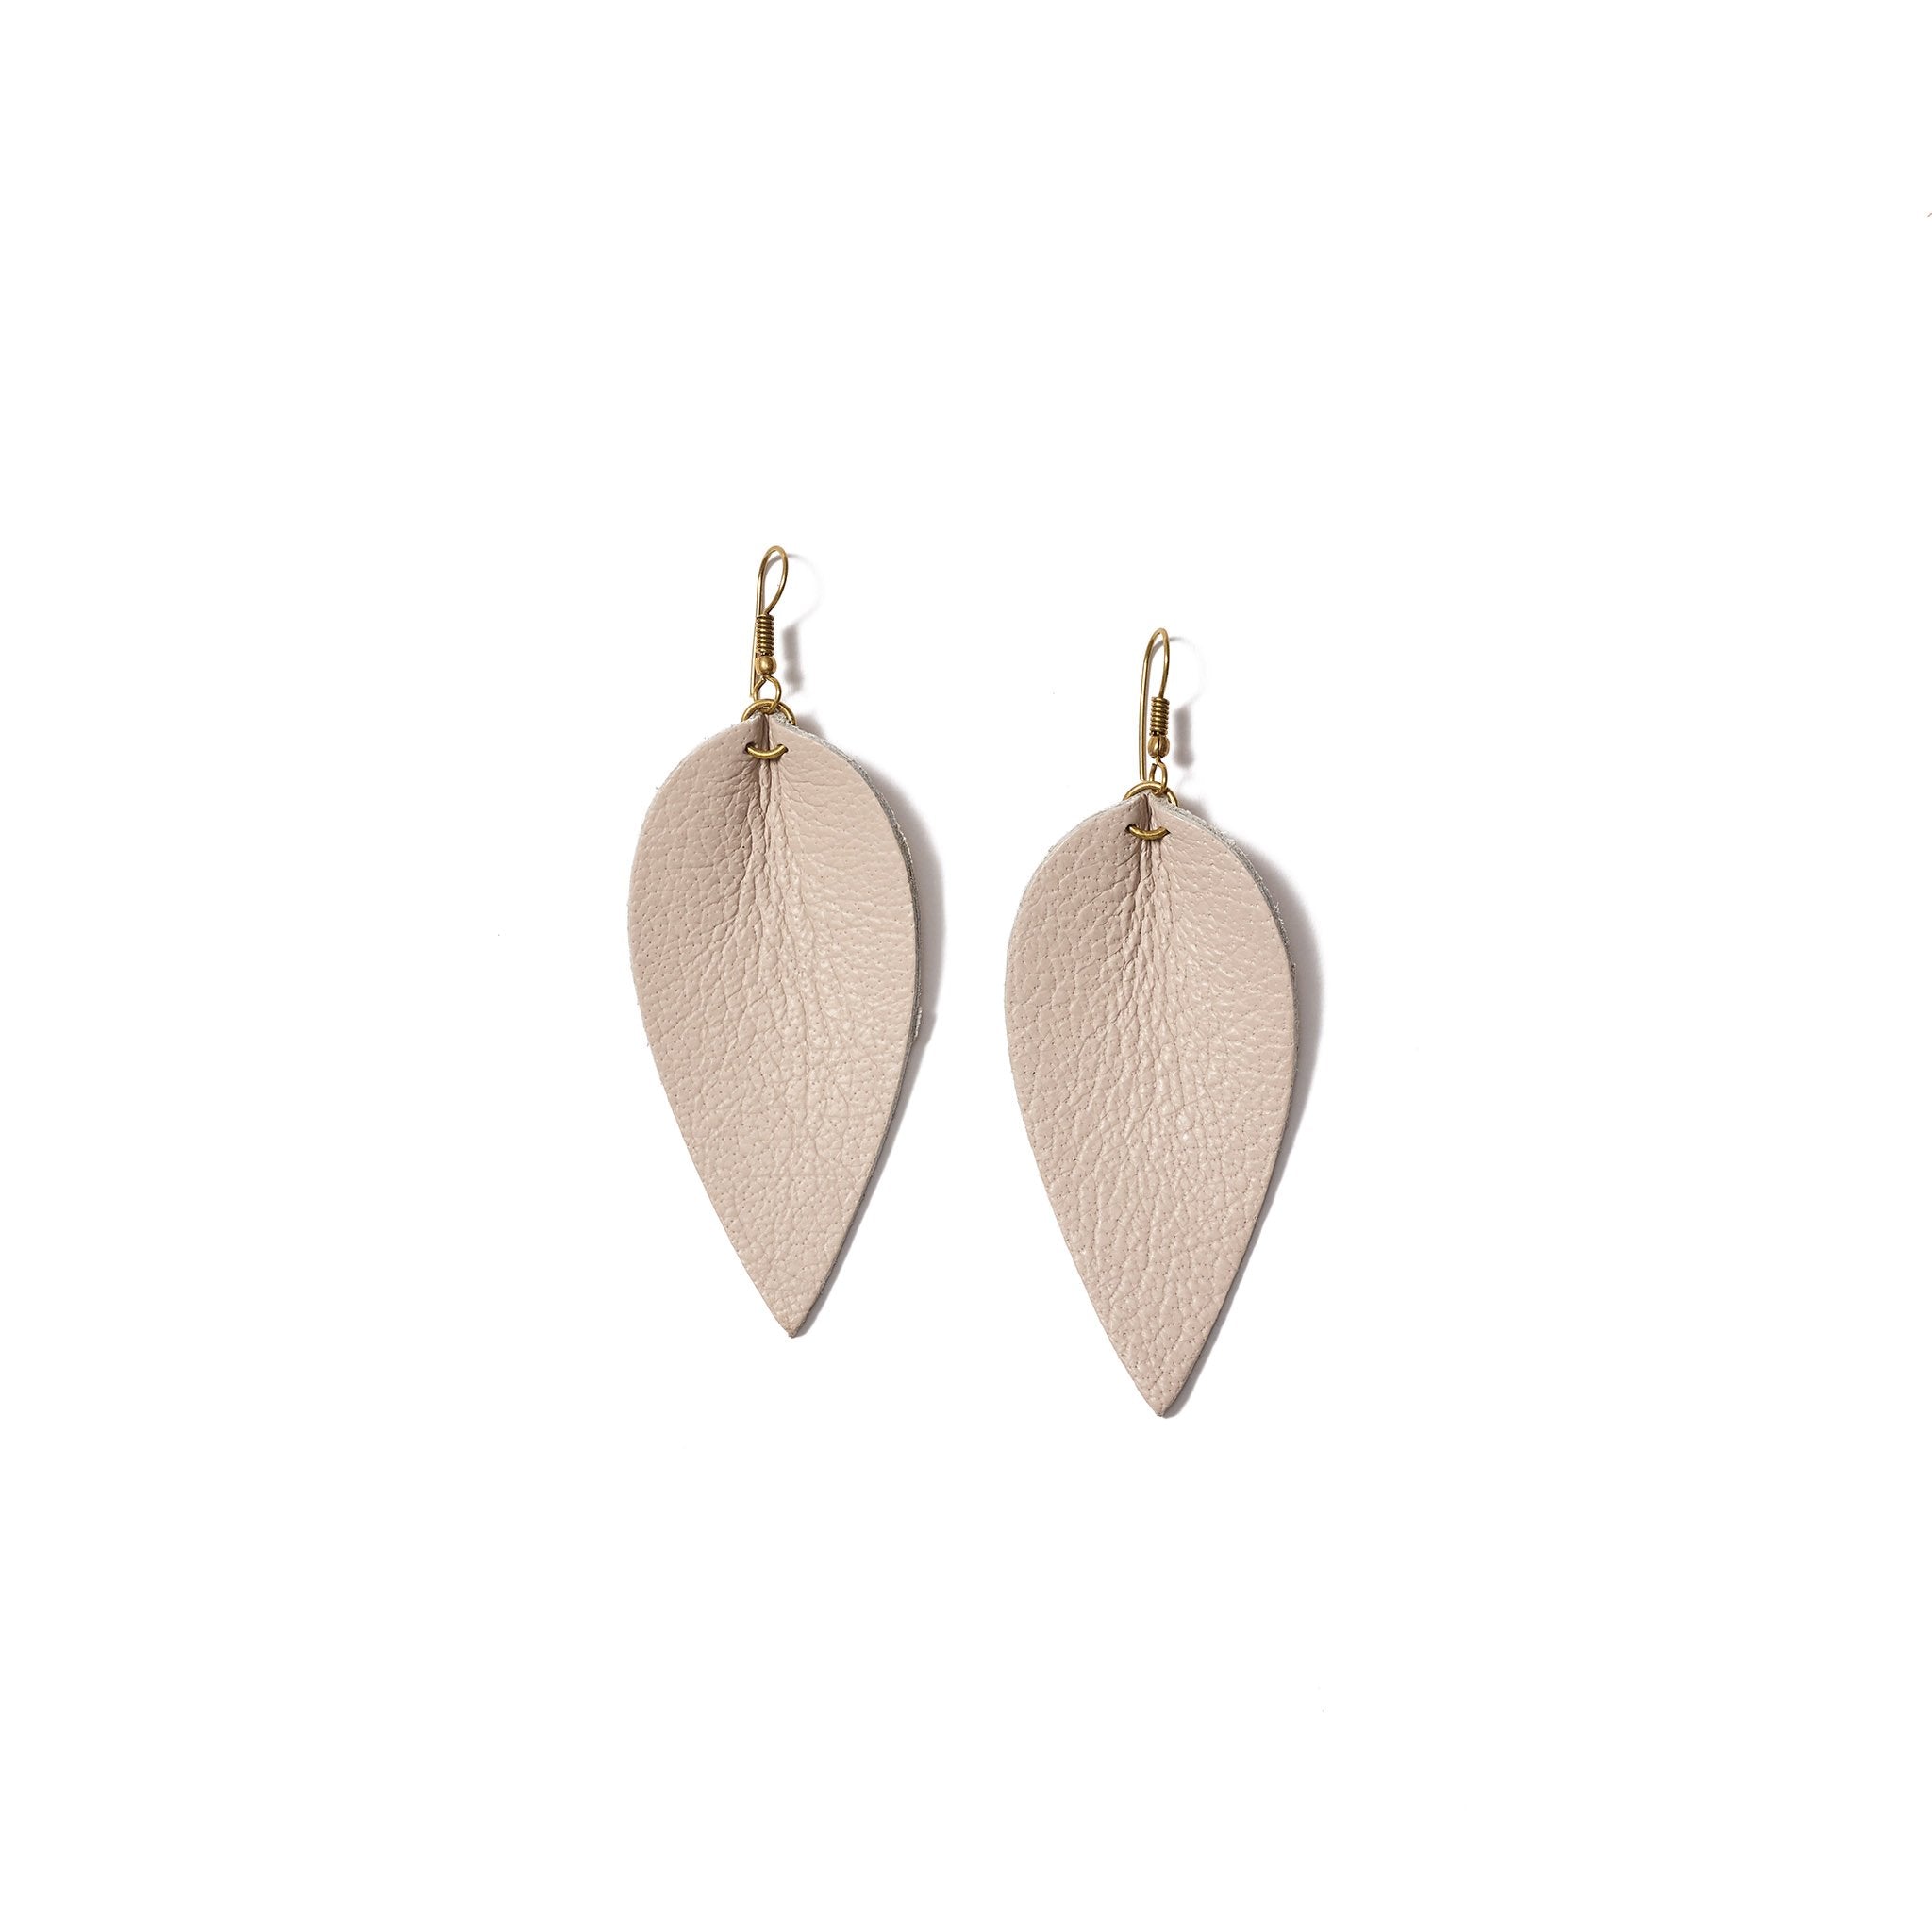 Classic design that transitions effortlessly from day to night, these grey leather leaf earrings are handcrafted from sustainable leather.